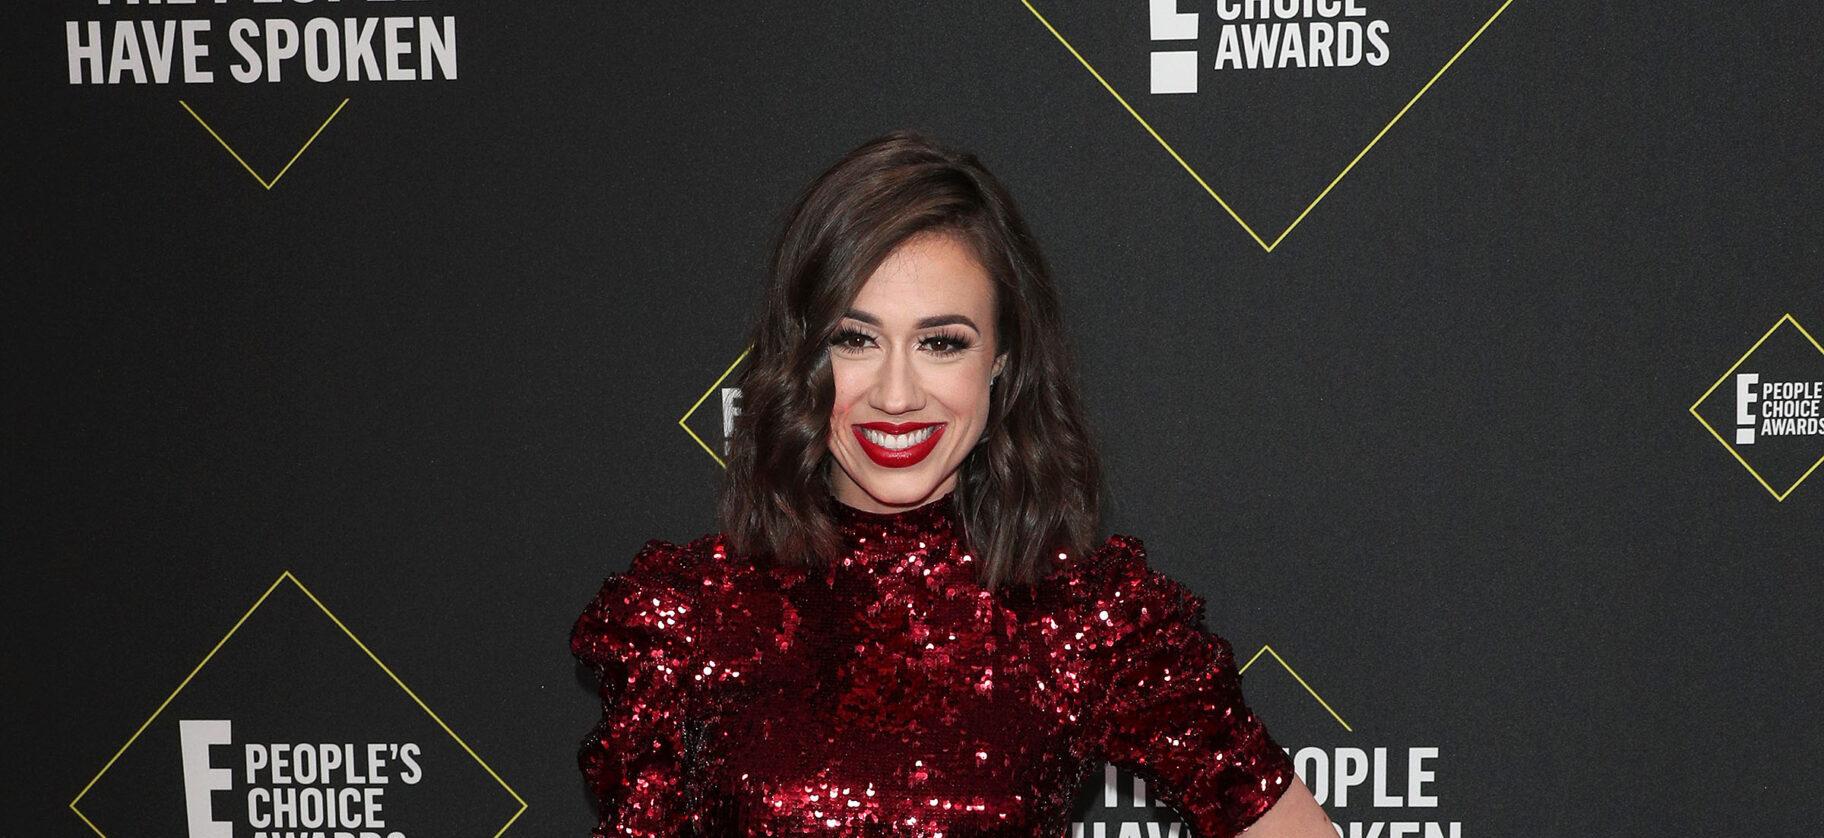 Colleen Ballinger Breaks Her Silence In Brand New YouTube Vlog Amid Controversy!